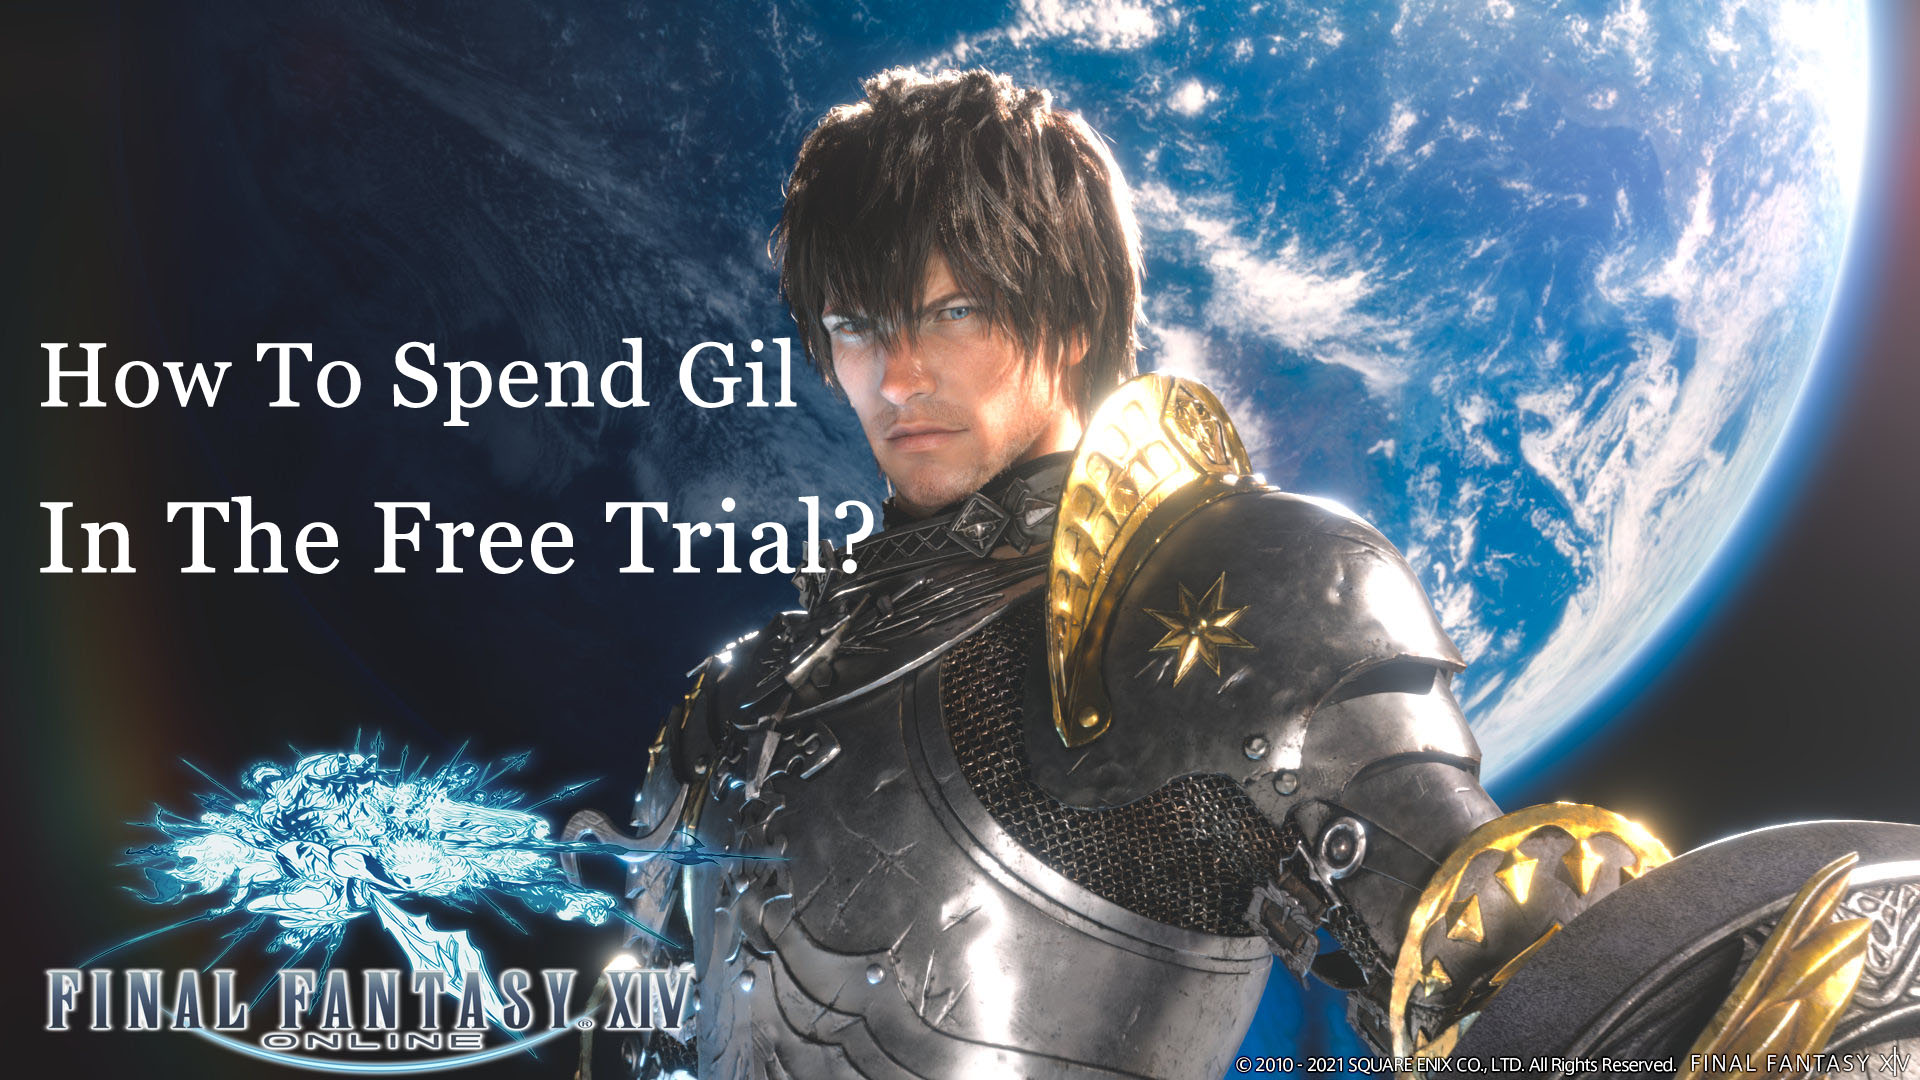 How to Spend Gil in the Final Fantasy XIV Free Trial?